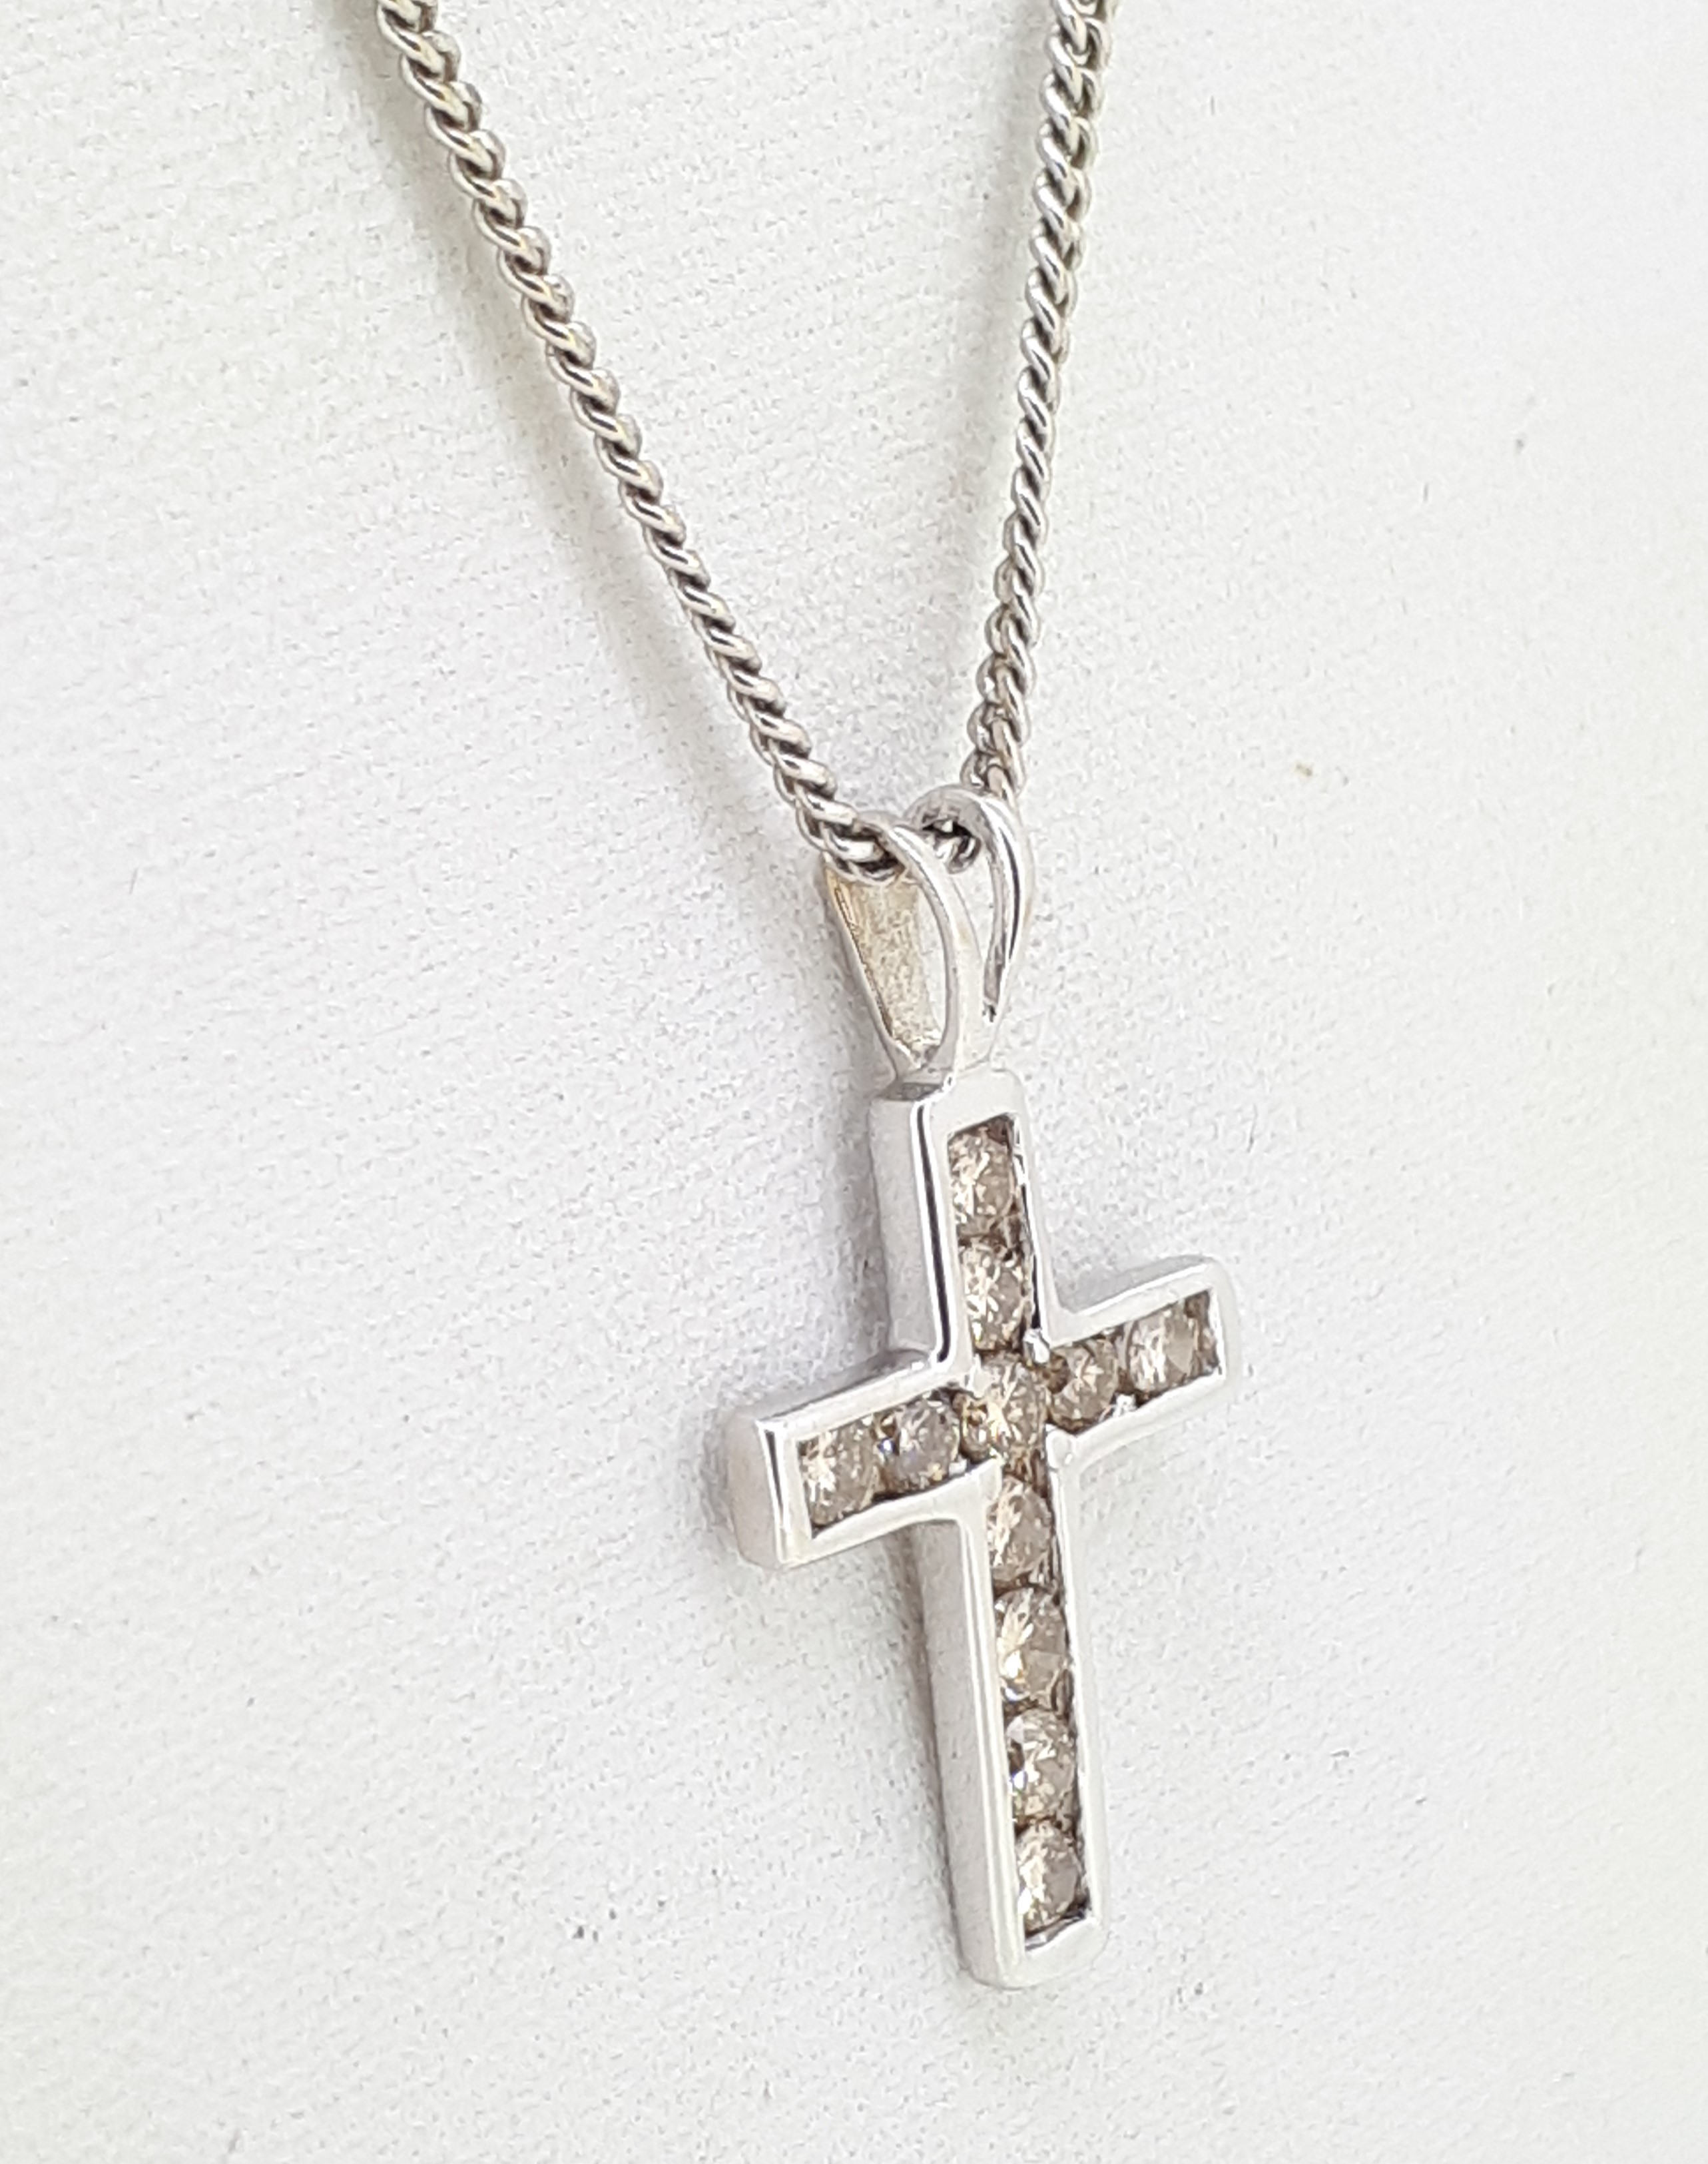 18ct (750) White Gold Diamond Cross Pendant and 16" Curb Chain Necklace - Image 3 of 3